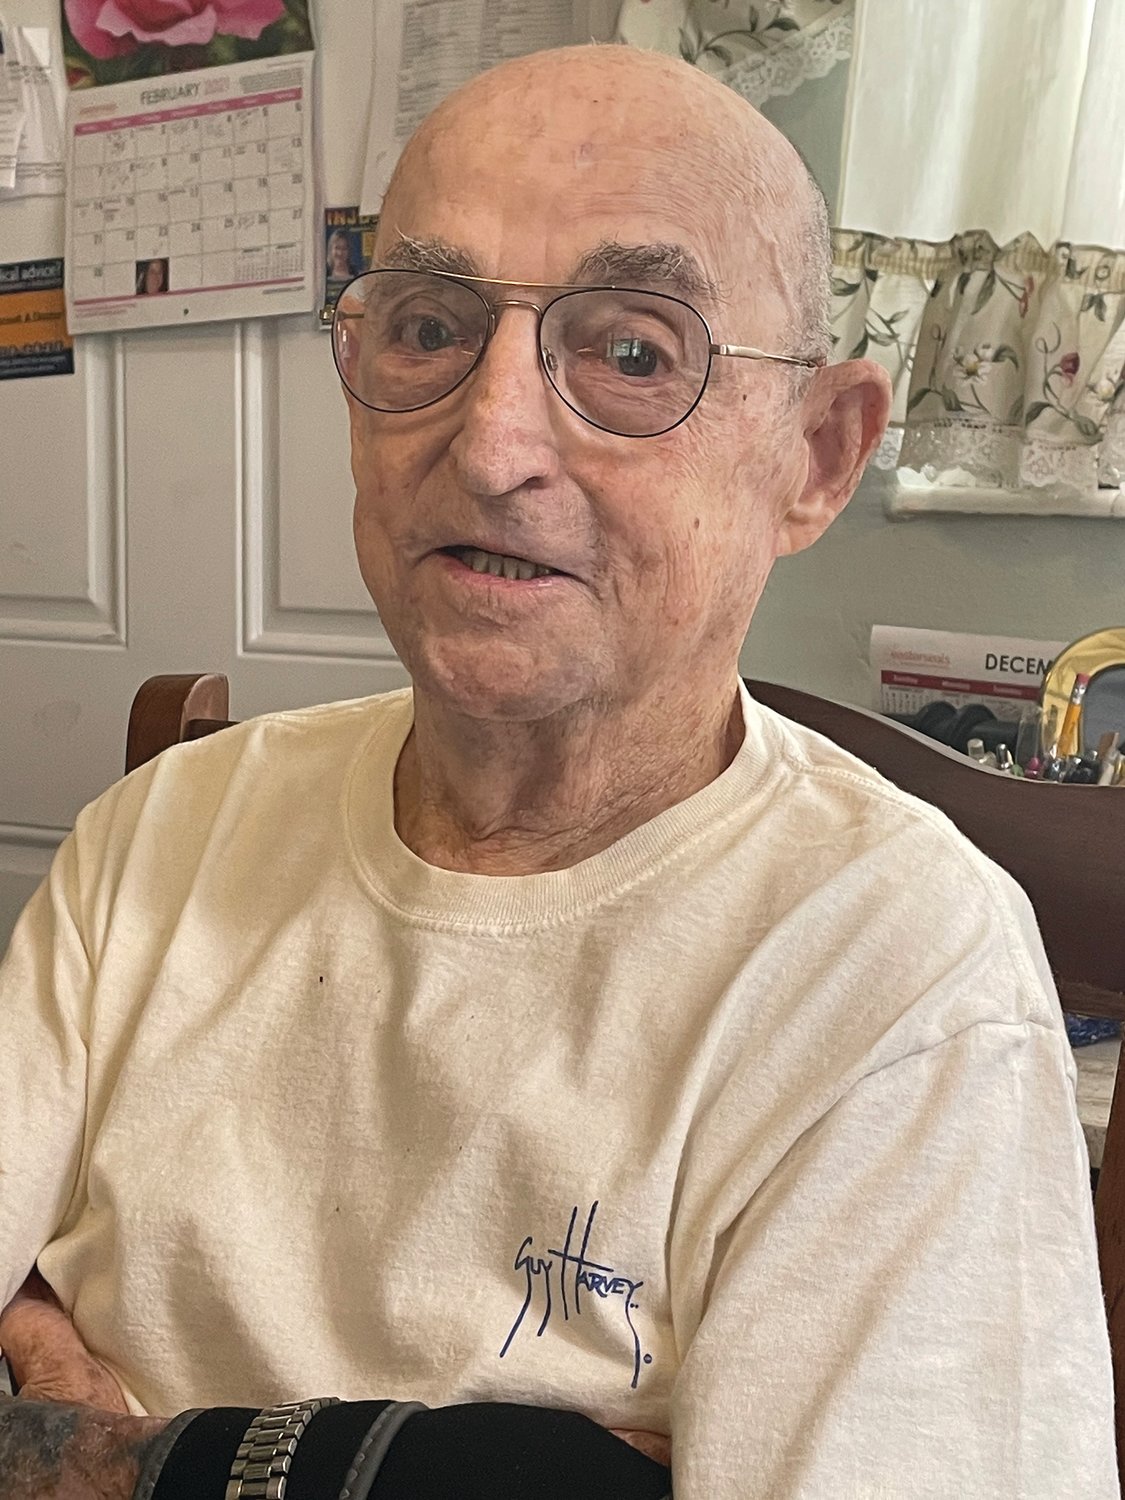 Robert “Bud” Stefanko served 10 1/2 years in the military.